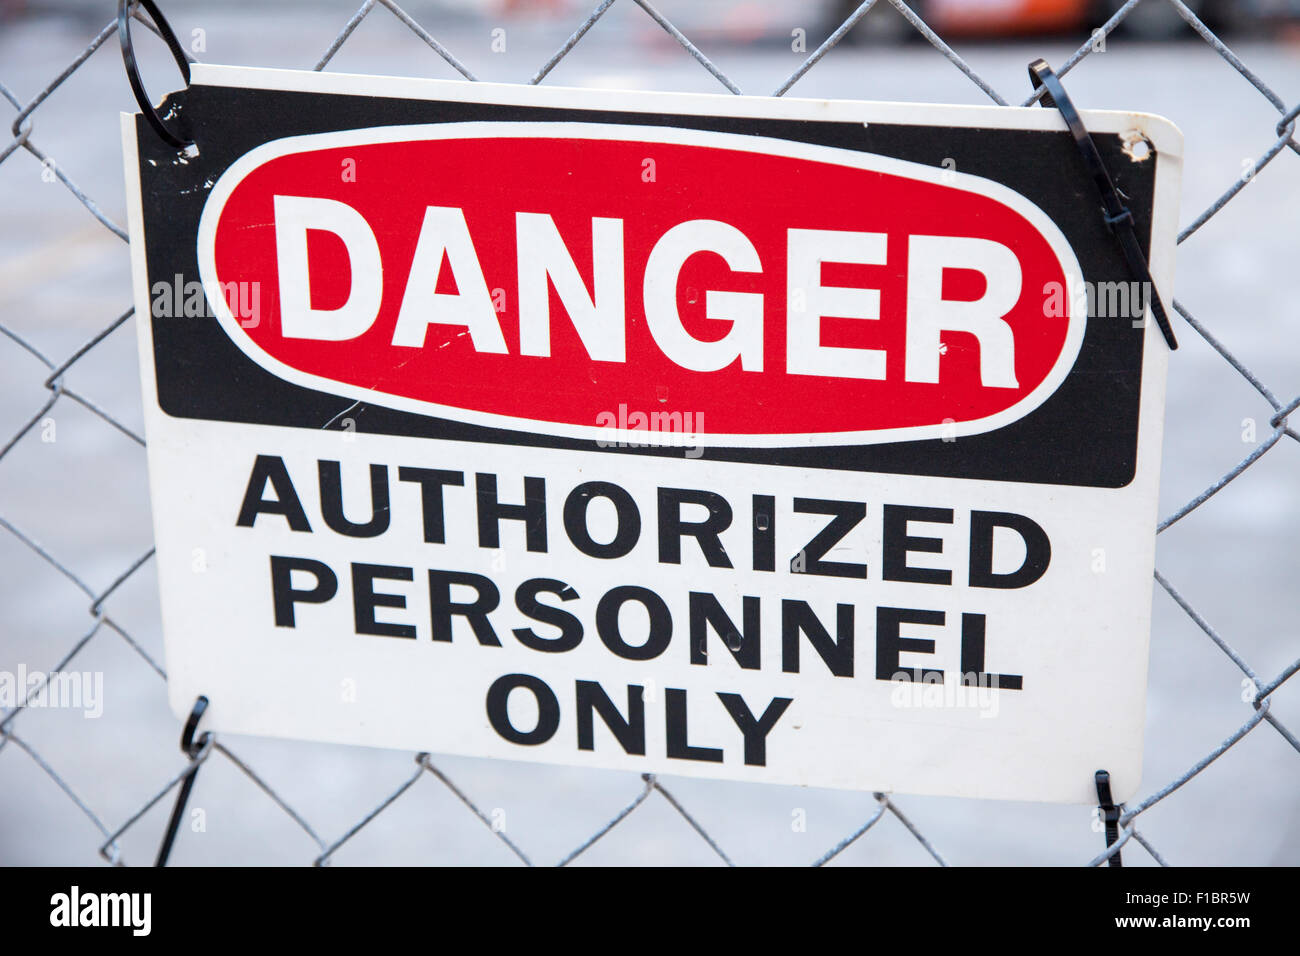 Danger authorized personnel only Stock Photo